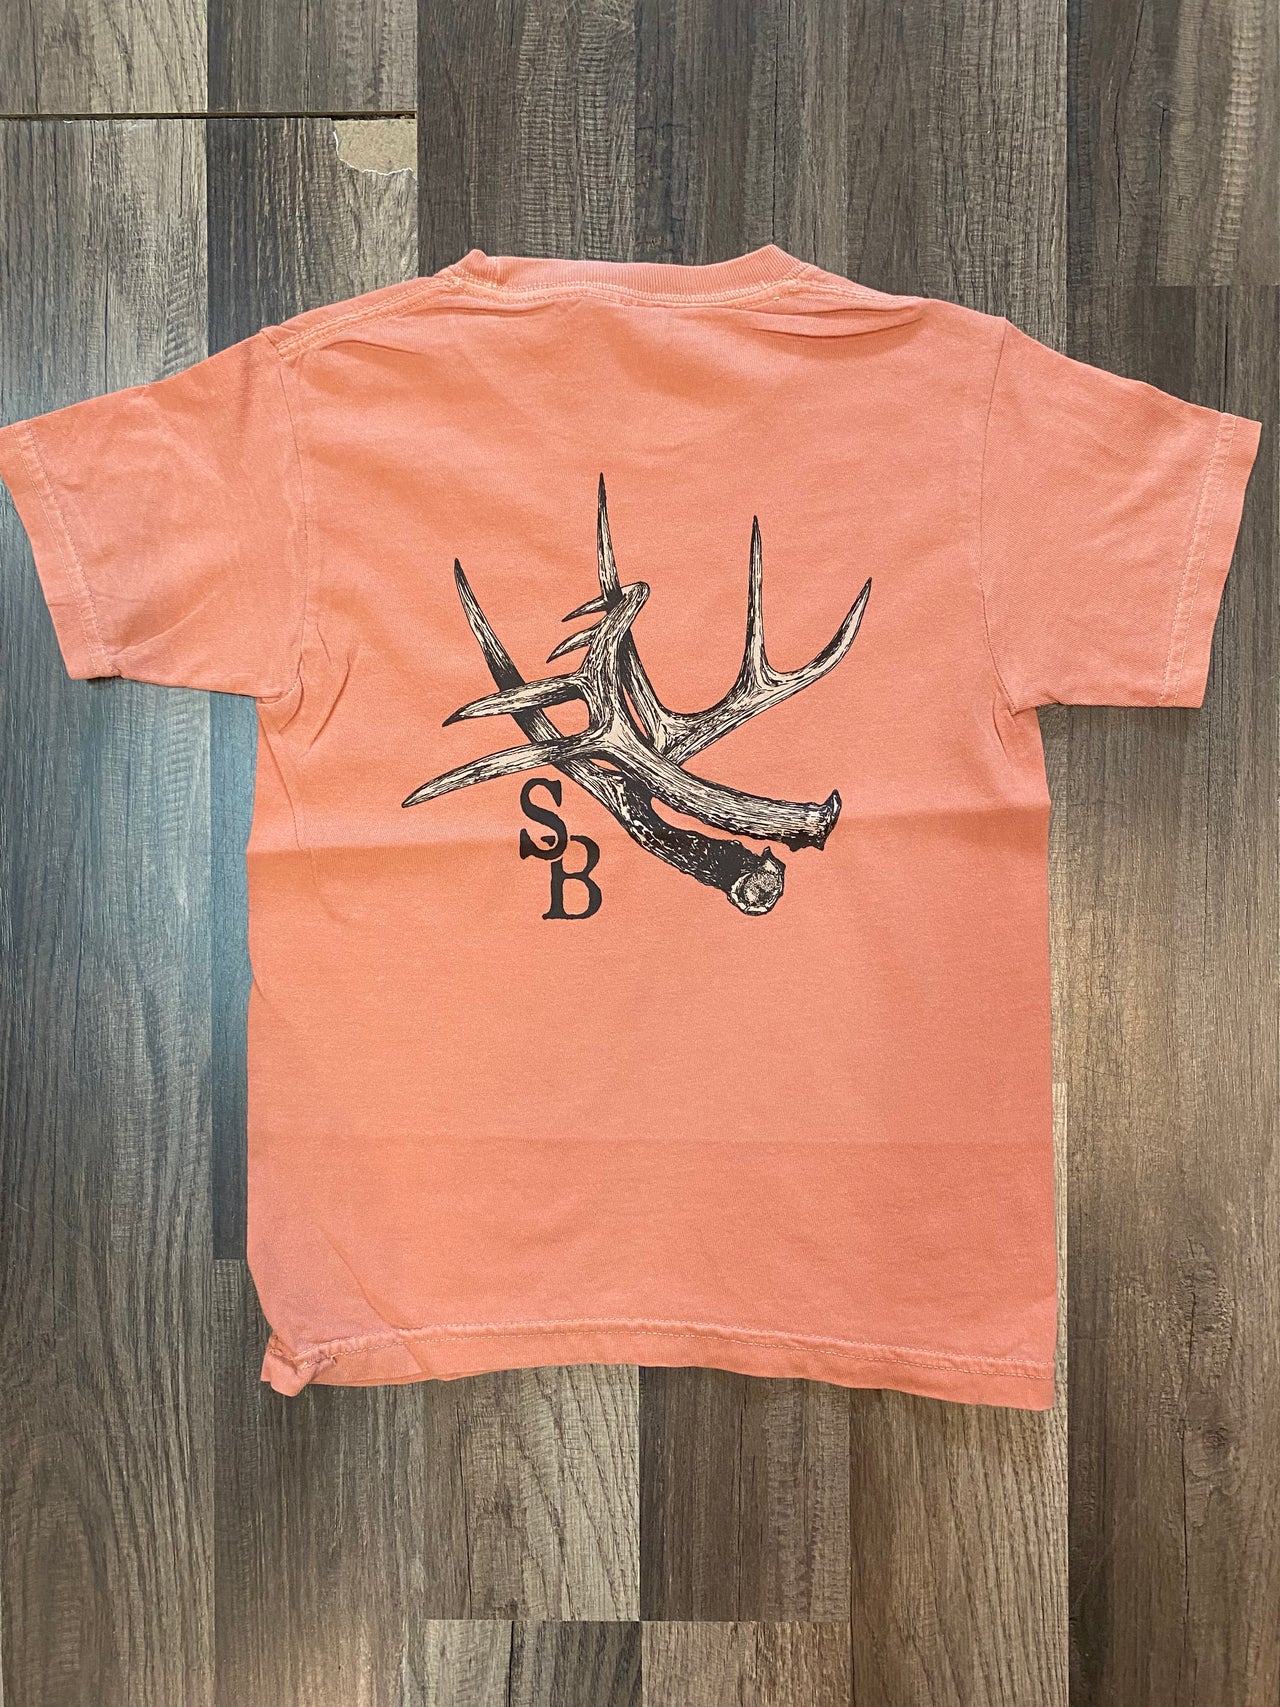 "Image of a Youth Speckle Bellies Terracotta Color Antler Short Sleeve Tee in Gildan Natural, featuring a soft washed garment dyed fabric with twill-taped neck and shoulders. The tee has double-needle stitching on the collar, armhole, sleeves, and bottom hem. Pigment shades naturally vary, creating a unique and textured appearance."